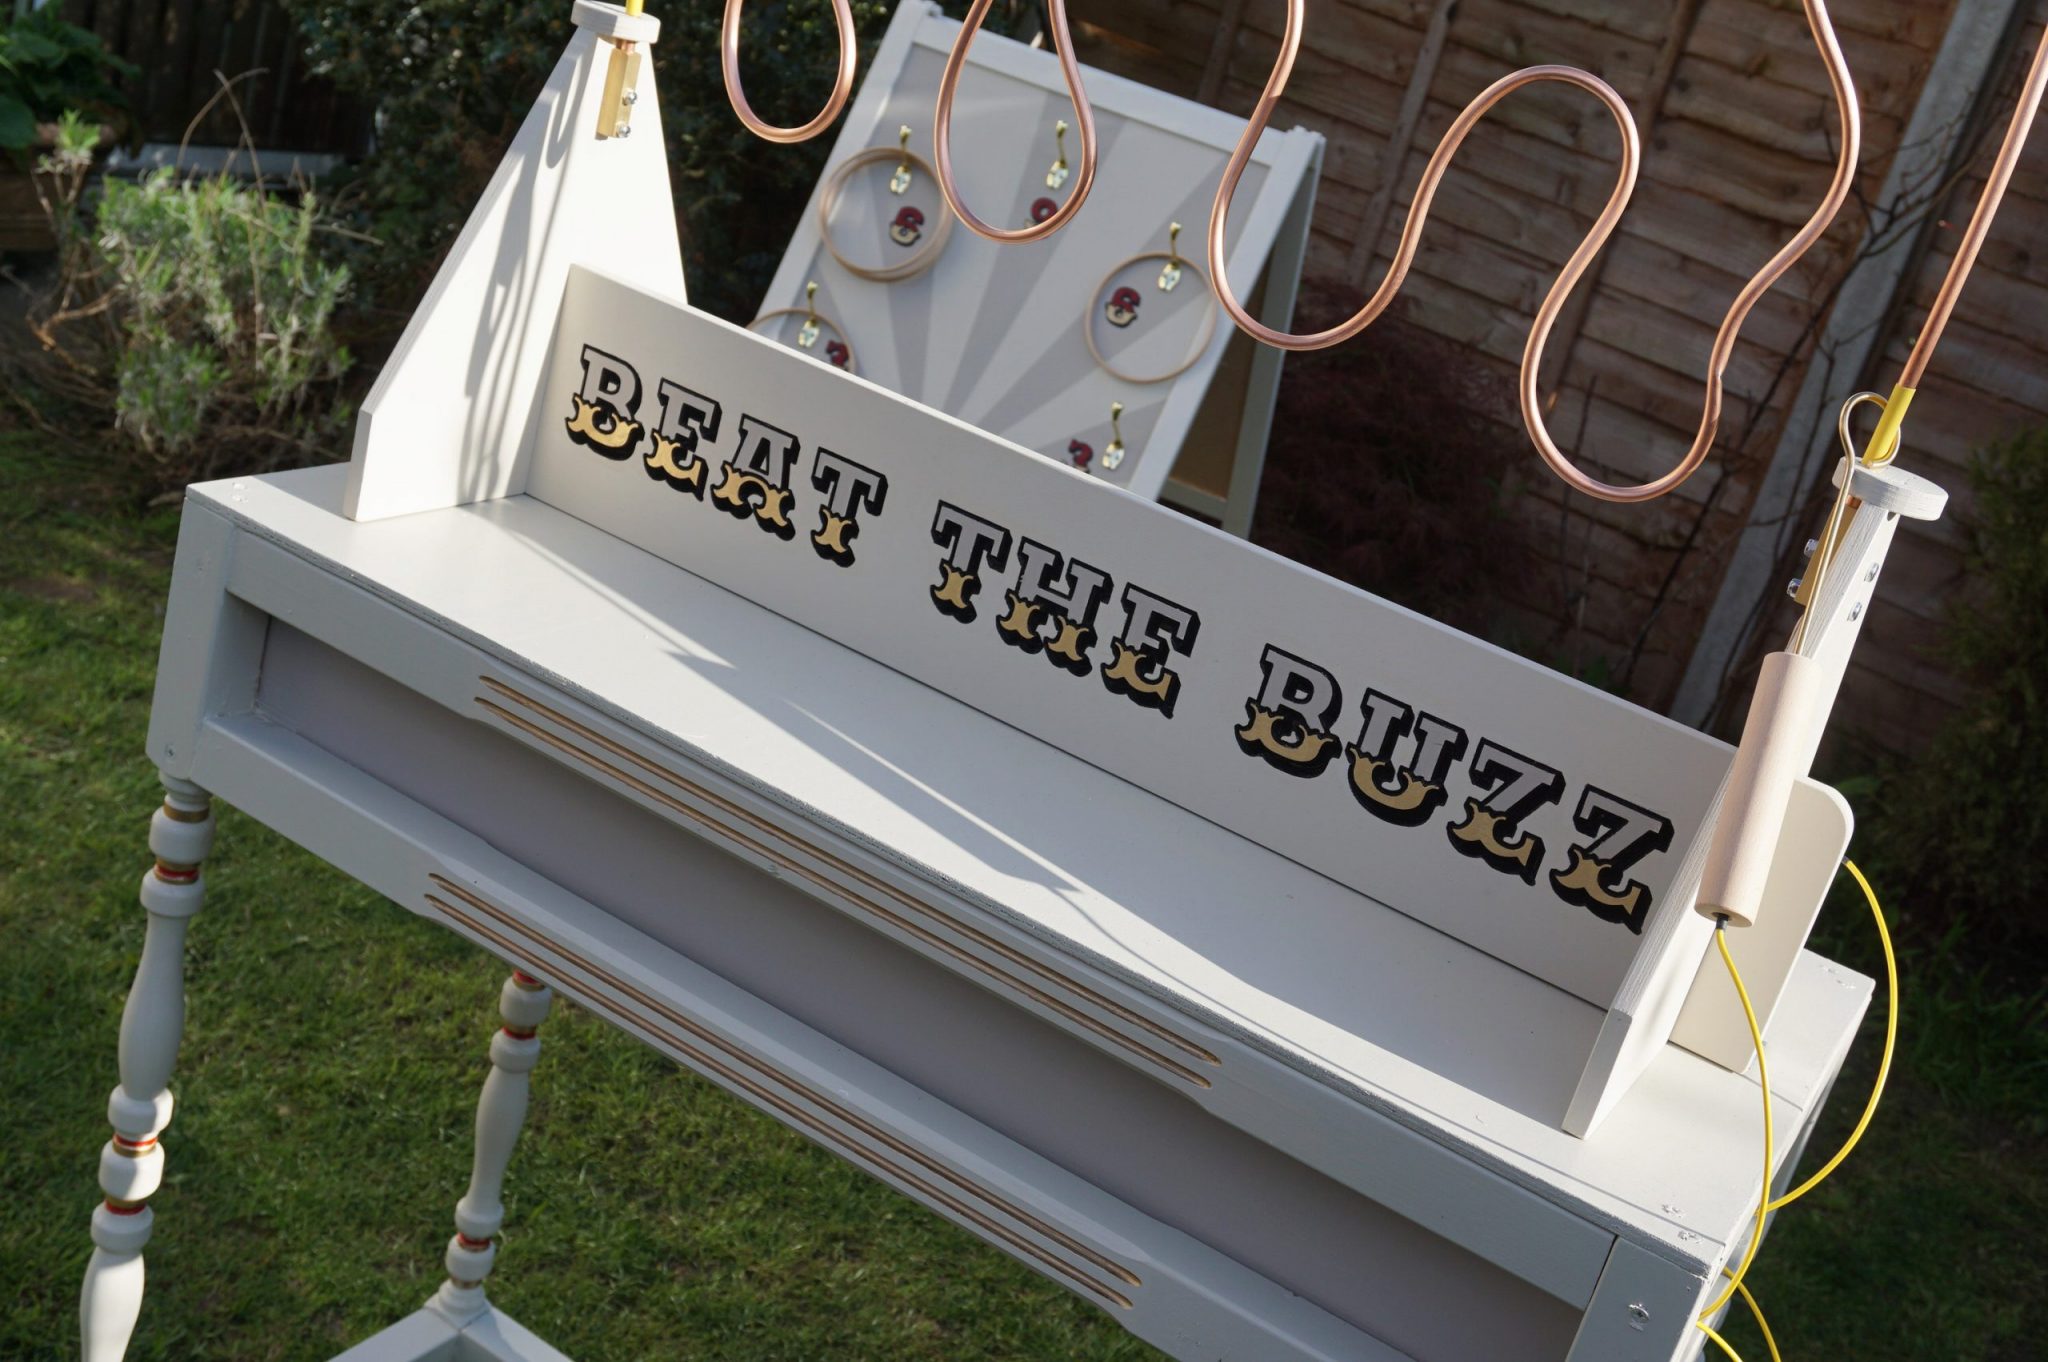 Beat the buzz game by The White Van Wedding Company